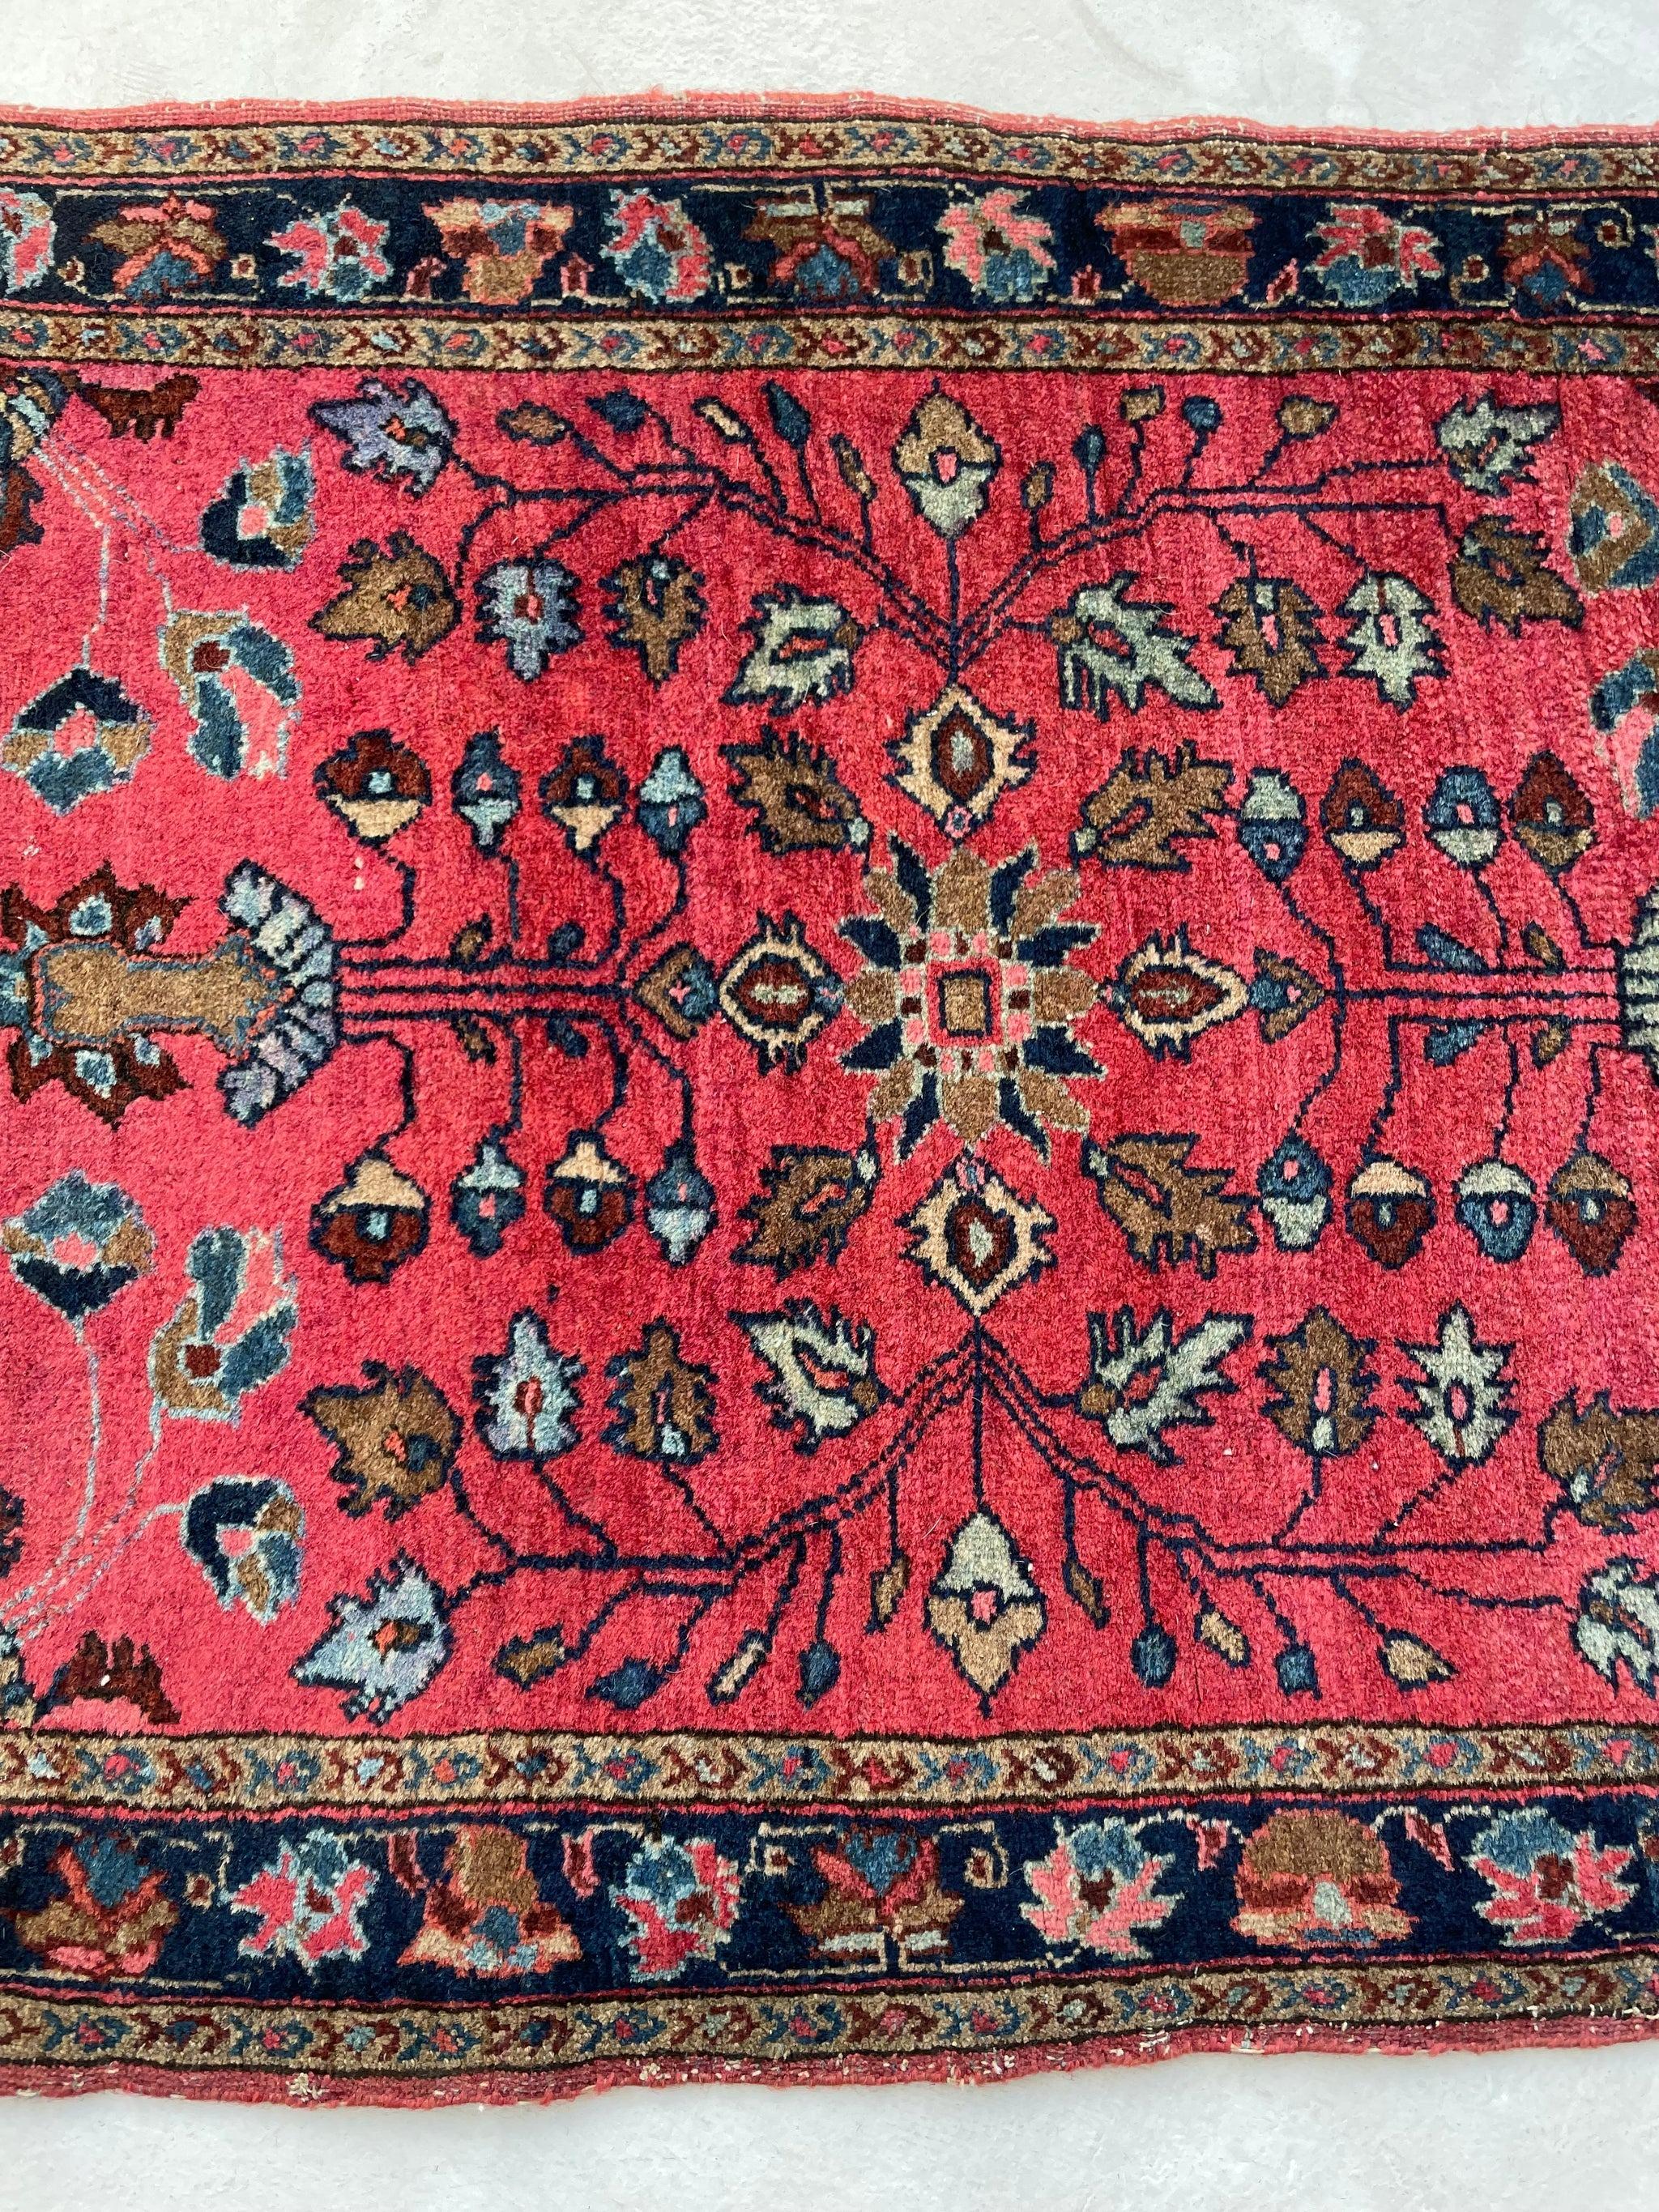 Dyed Antique Mohajeran Sarouk with Artistic Open Vines in Super Fine Lamb Wool  For Sale